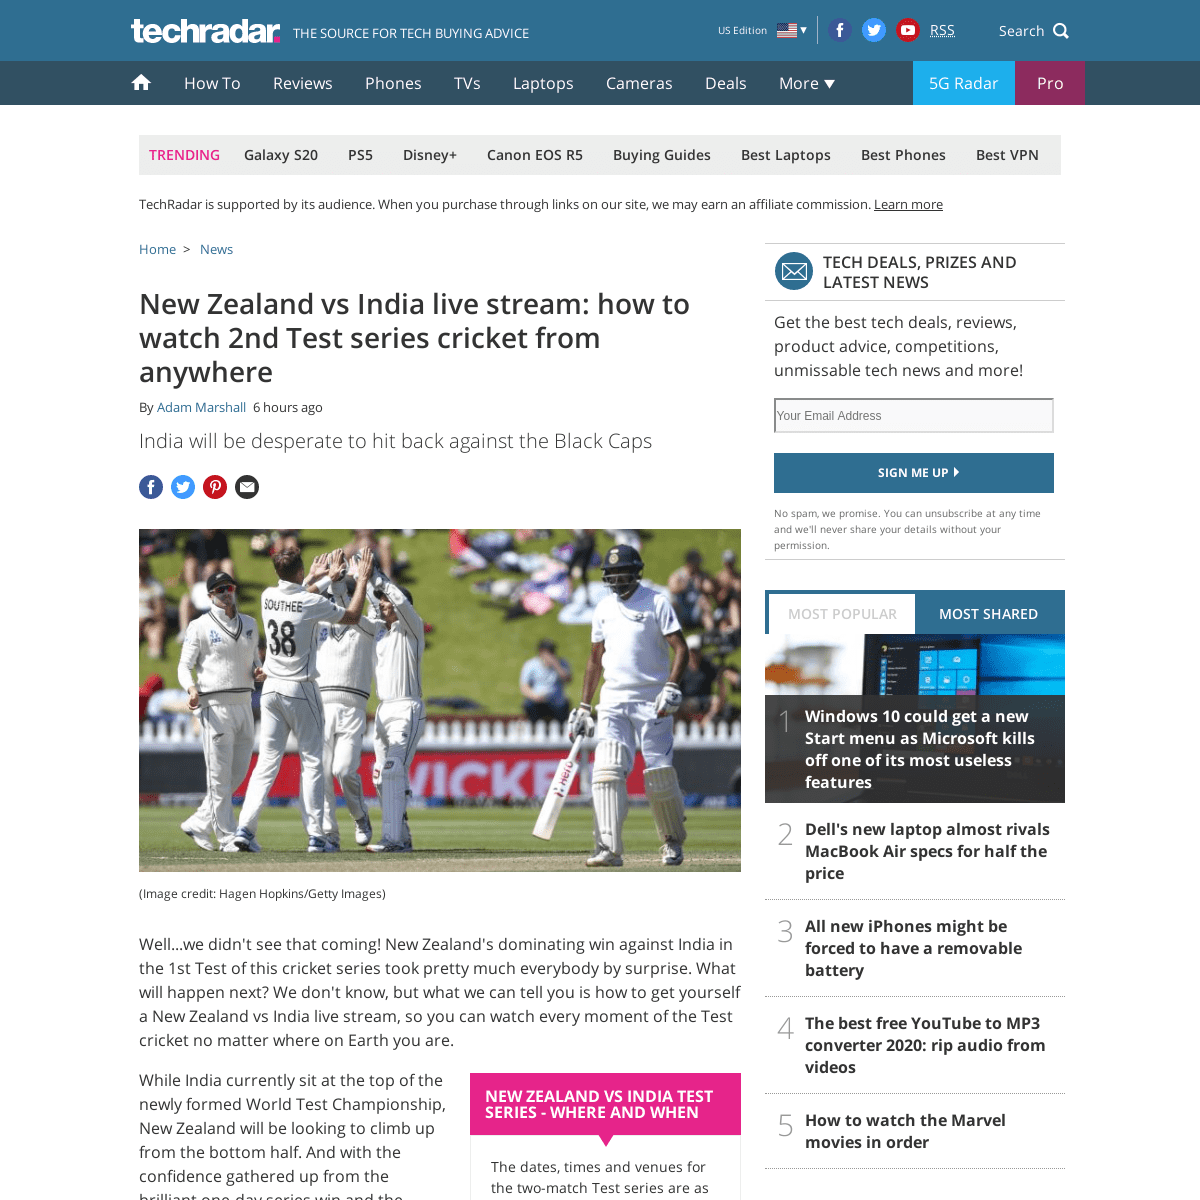 A complete backup of www.techradar.com/news/new-zealand-vs-india-live-stream-how-to-watch-2nd-test-series-cricket-from-anywhere